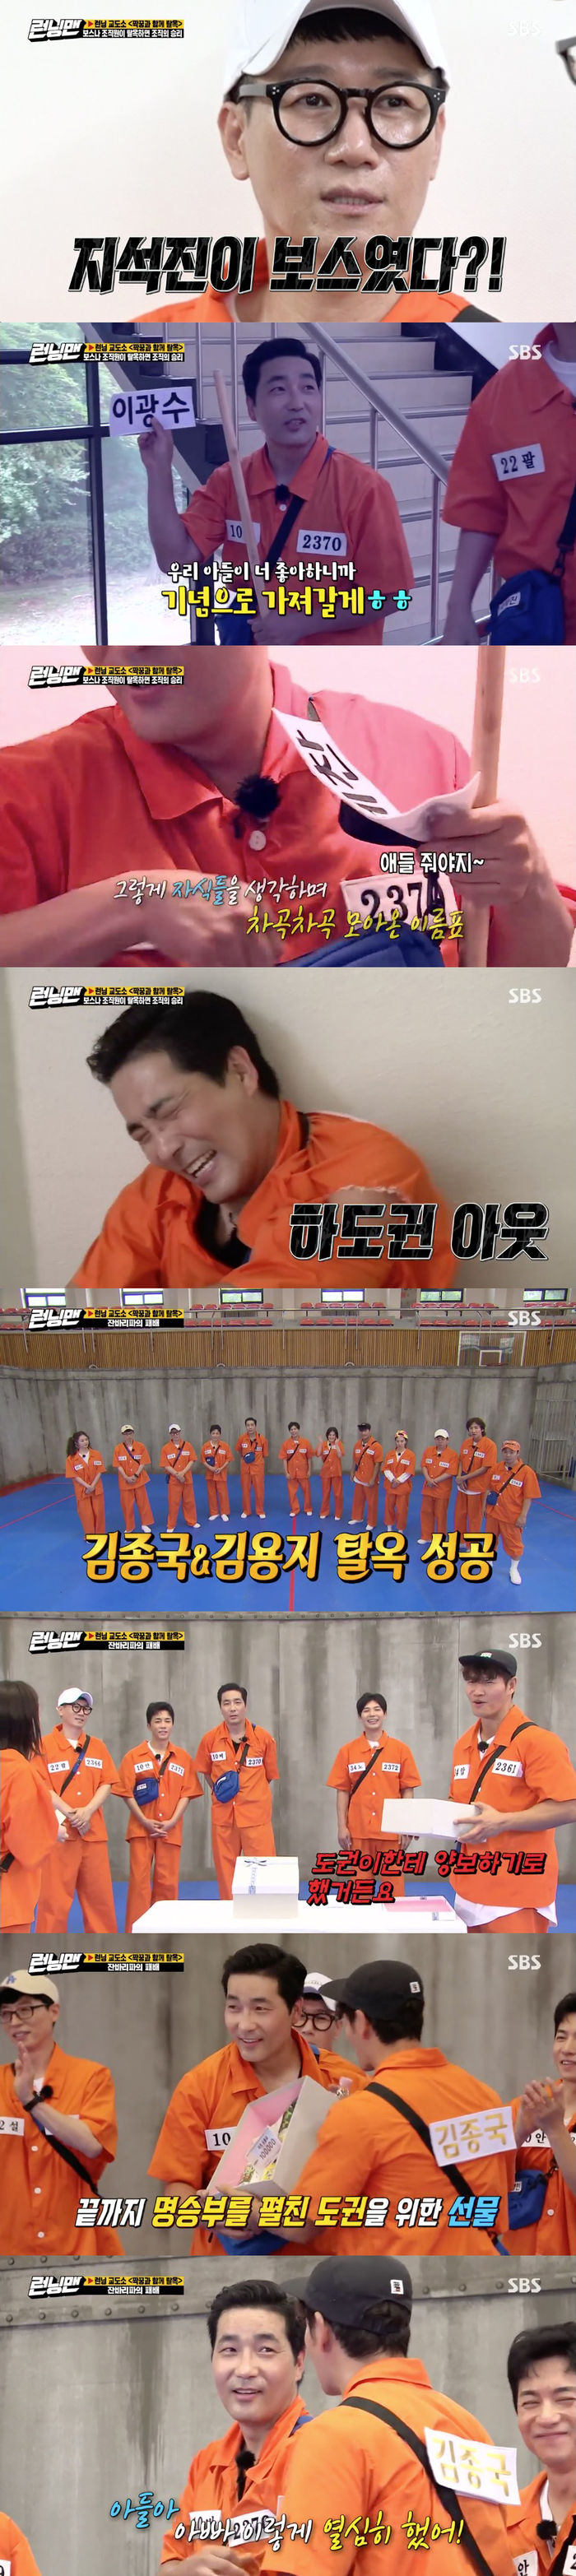 Ha Do-kwon showed off his sense of entertainment.On SBS Running Man broadcasted on the 9th, running prison race was held.On this day, Bose Corporation and its members hiding in the members escaped or the rest of the inmates had to escape their running prison race.Inmates went out looking for fake walls in the race, where they had to escape in a tower car hidden behind fake walls.And Kim Yung-min, an organizer who has to escape safely with Bose Corporation, informed his partner, Yoo Jae-Suk, of his identity.Kim Yung-min, an organizer, said, I think I know who Bose Corporation is.Thats when Yang Se-chan asked his mates, Jeon So-min and Song Ji-hyo, to find a fake wall.And they accidentally discovered a fake wall and started to break it.At this time, Lee Kwang-soo was in-N-Out Burger by someone, and Song Ji-hyo, who was a partner, was also in-N-Out Burger.And the remaining Yang Se-chan and Jeon So-min smashed the fake wall but were devastated to find a door locked in Password behind the fake wall.At this time, the fuss was detected and the inmates came in to confirm the location of the Password and the car.Ji Seung-hyun, who suspected Yang Se-chan as Bose Corporation, made In-N-Out Burger of Yang Se-chans partner, Jeon So-min.But Yang Se-chan and Jeon So-min were ordinary inmates.At the time of the inmates suspicion of each other and eager to get a password to ride the car, Kim Yung-min approached Ji Suk-jin and said, Bose Corporation, you should go out quickly.Bose Corporation, which was hidden among the inmates, was Ji Suk-jin, a partner of Ji Suk-jin, Ha Do-kwon, and Kim Yung-min, an organizer, and his partner, Yoo Jae-Suk, need a name tag to get Password.However, Ha Do-kwon collected the name tag of the running man that the children like, like a souvenir, and collected four name tags already.Yoo Jae-Suk said, Then we will take one of us name tags. Ji Suk-jin admired This OO hair is good.Ji Suk-jin and Kim Yung-min eventually took off Kim Yung-mins name tag, which had a defense, to win Password for escape.Ji Suk-jin then headed for the escape gate in the defence of Ha Do-kwon.Kim Jong-kook, who sensed this, attracted Ha Do-kwon and drove him to In-N-Out Burger and his partner Ji Suk-jin.Finally, Ha Do-kwon, who had a piece of paper with Password on it, put it in his mouth.And he said sharing the goods to Kim Jong-kook, who is looking for Password, and Kim Jong-kook said, Ill give you the goods.Give me your daughter, she said, winning Password.In the end, Kim Jong-kook and Kim Yong-ji succeeded in escaping from prison and won the final championship with less than a minute left.And Kim Jong-kook, as promised by Ha Do-kwon, said: I decided to concede this product to the potentate.I decided to give it to the children, so take it well. 